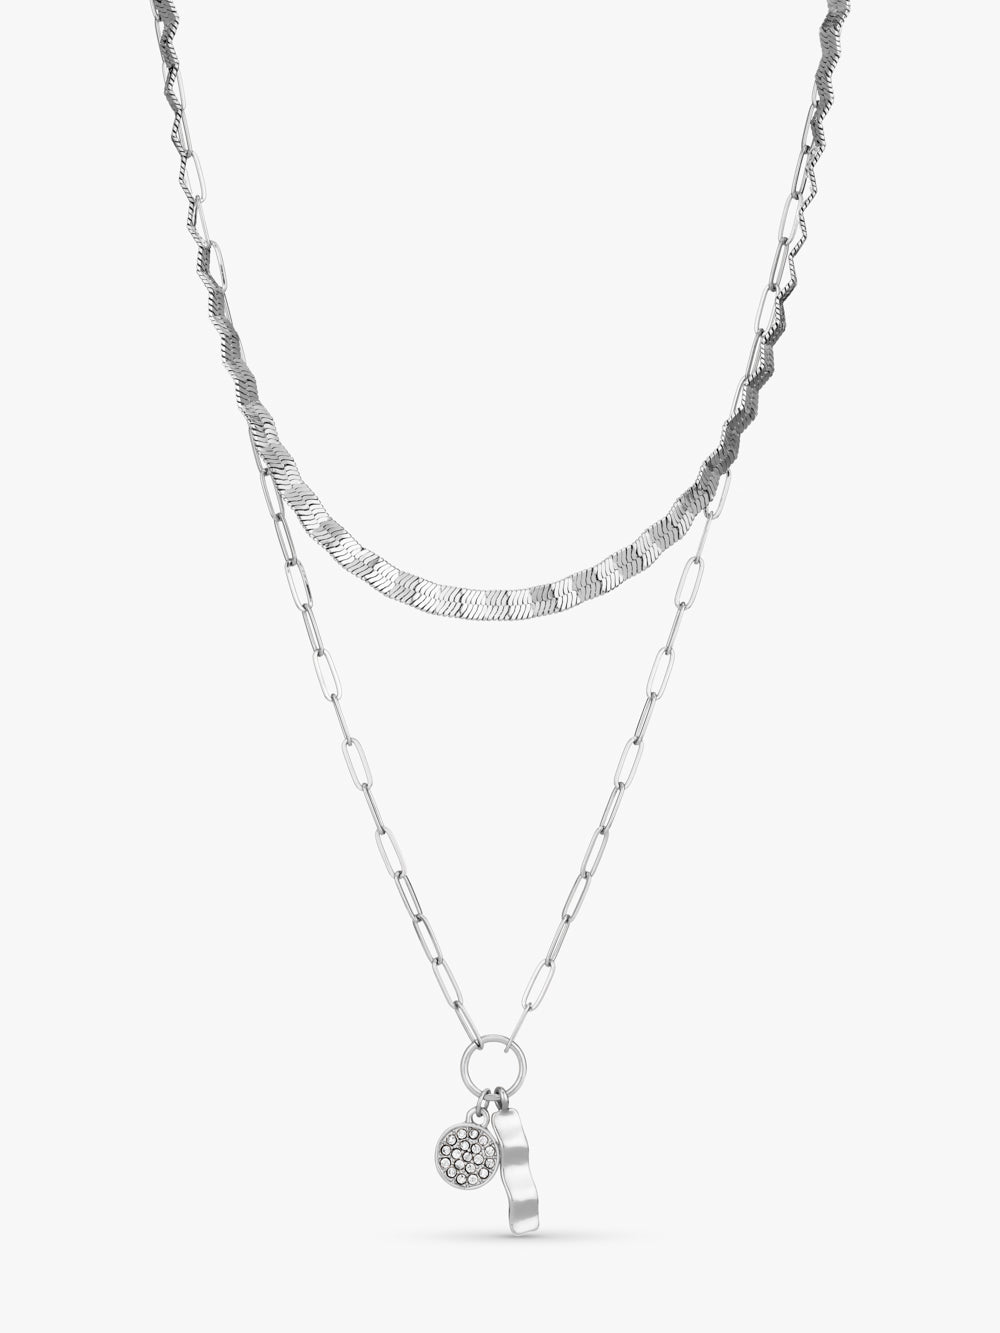 Small Stuff Accessories - Silver 2 row wiggle necklace with gem encrusted charm